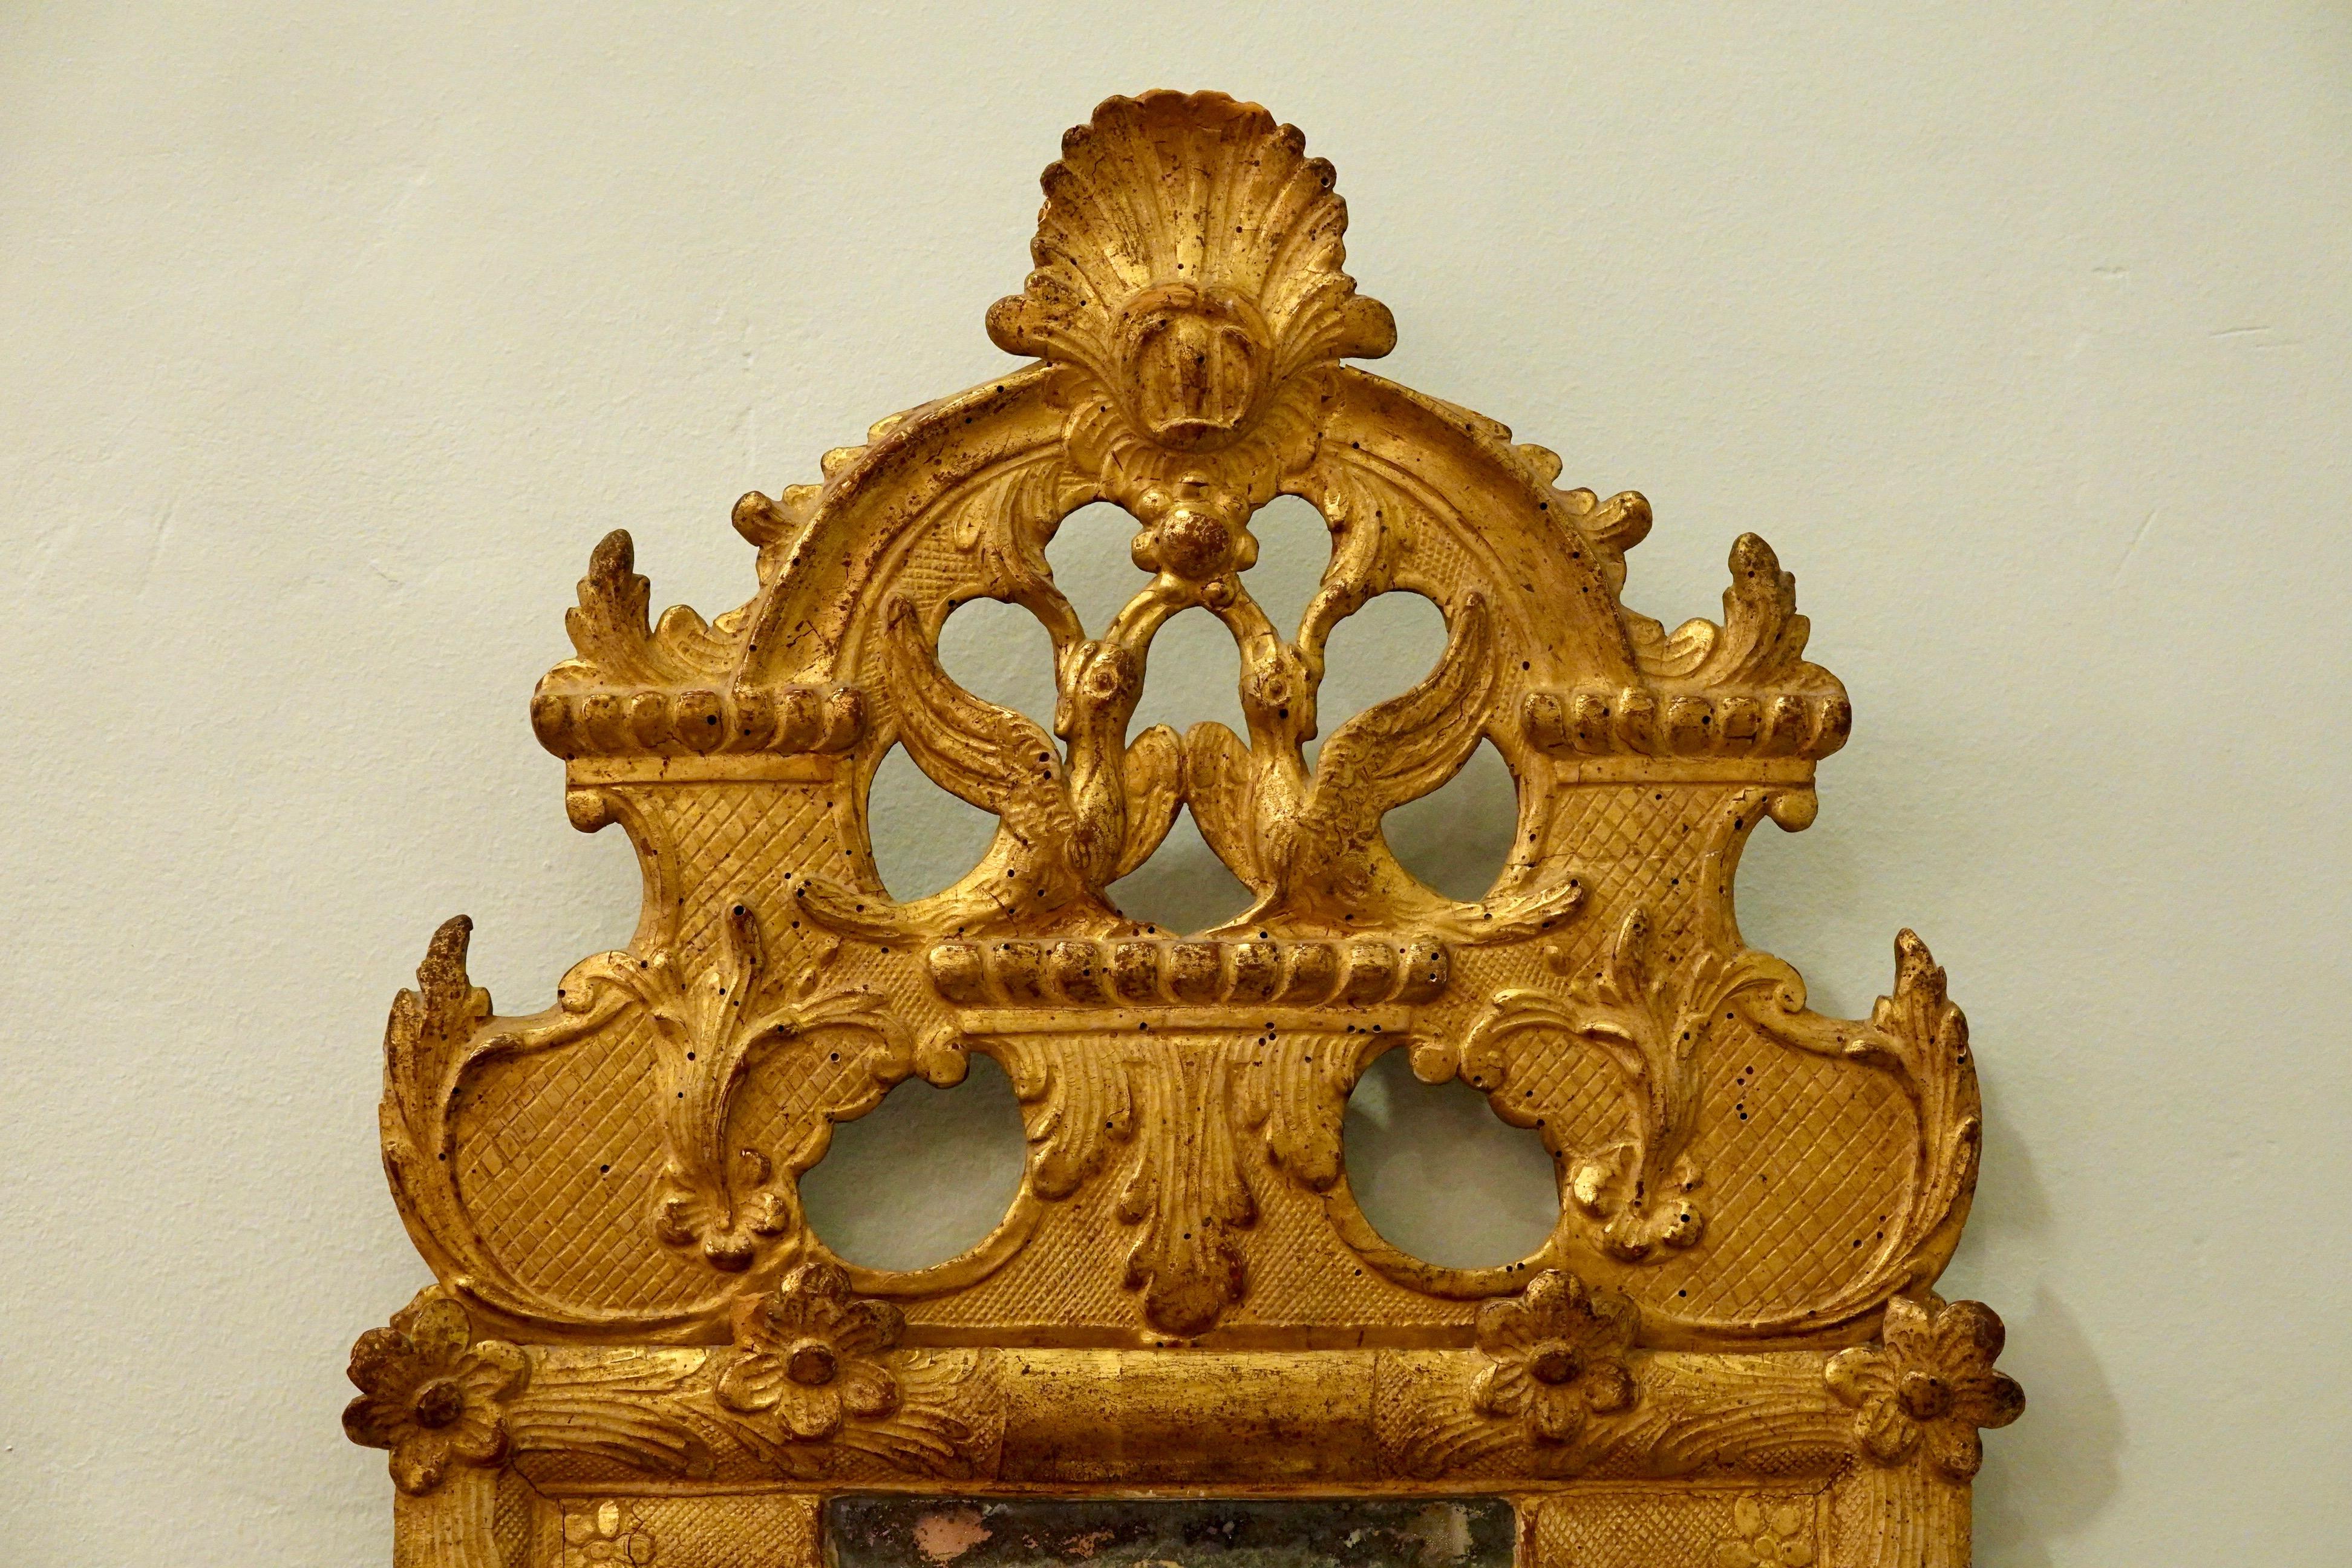 French Regence Period Giltwood Mirror with Birds, Scallop Shell and Flowers In Good Condition For Sale In Pembroke, MA